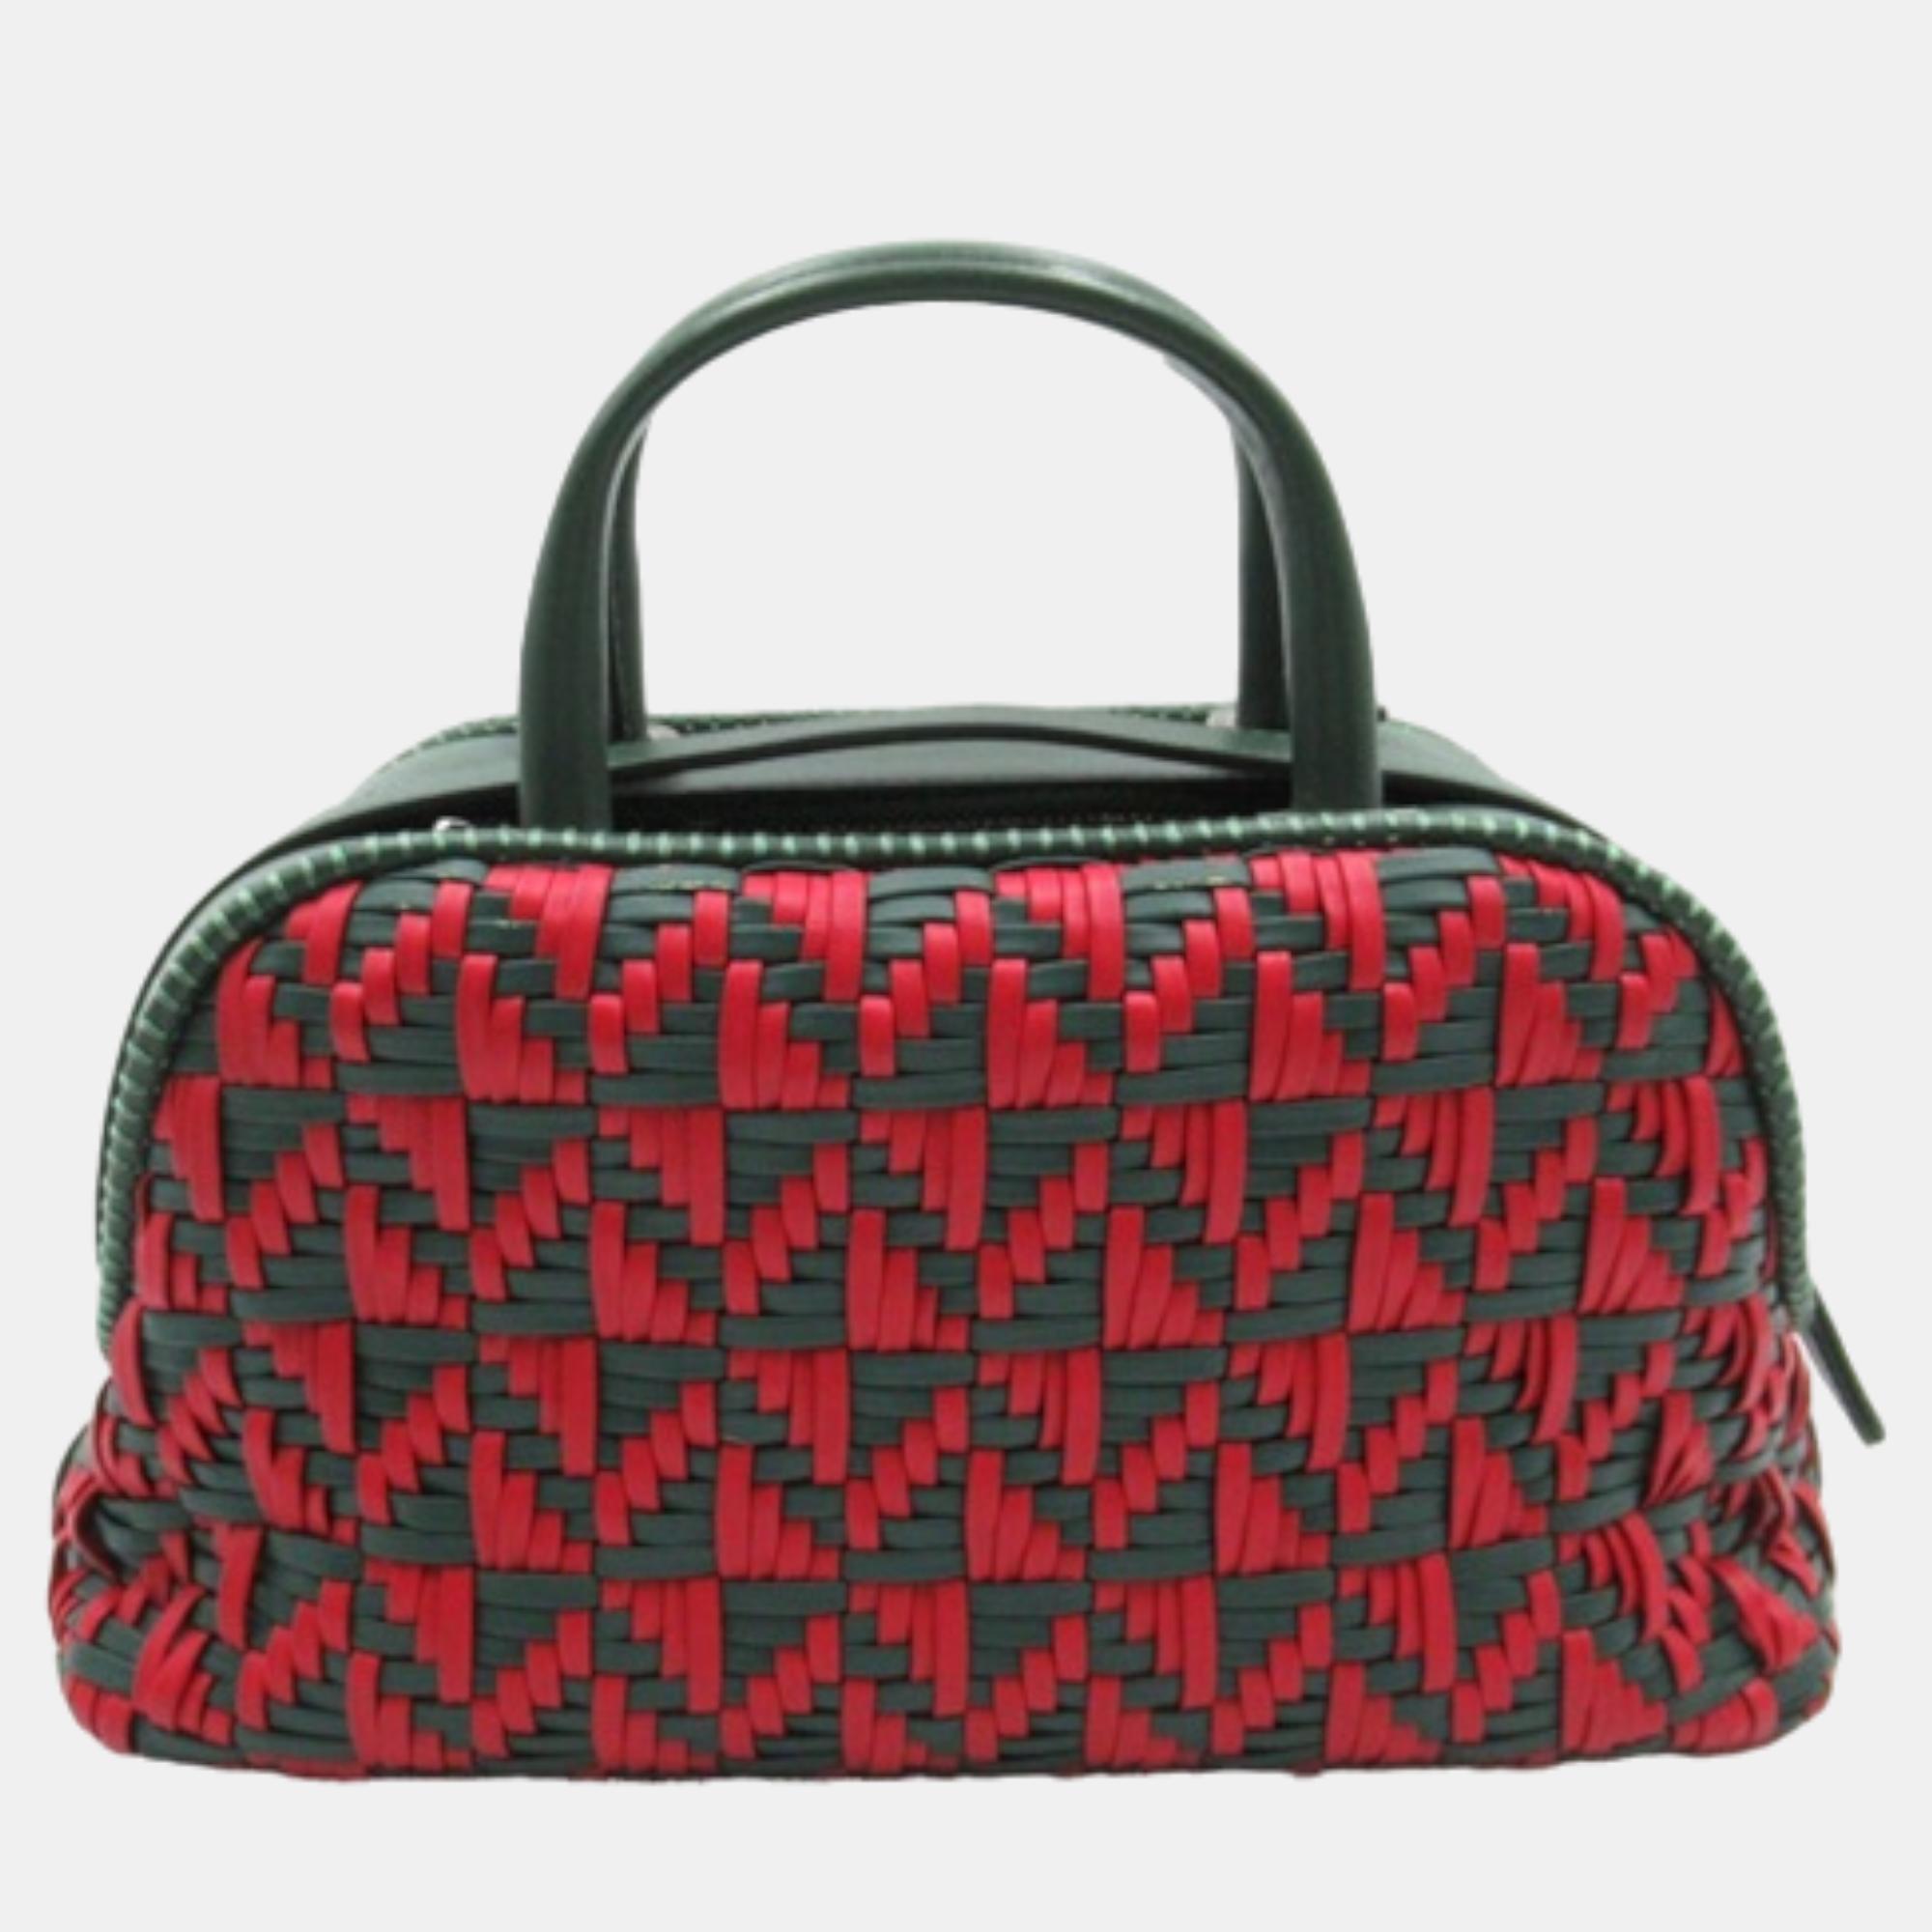 Chanel Red Leather Woven Leather Mini Boston Bag